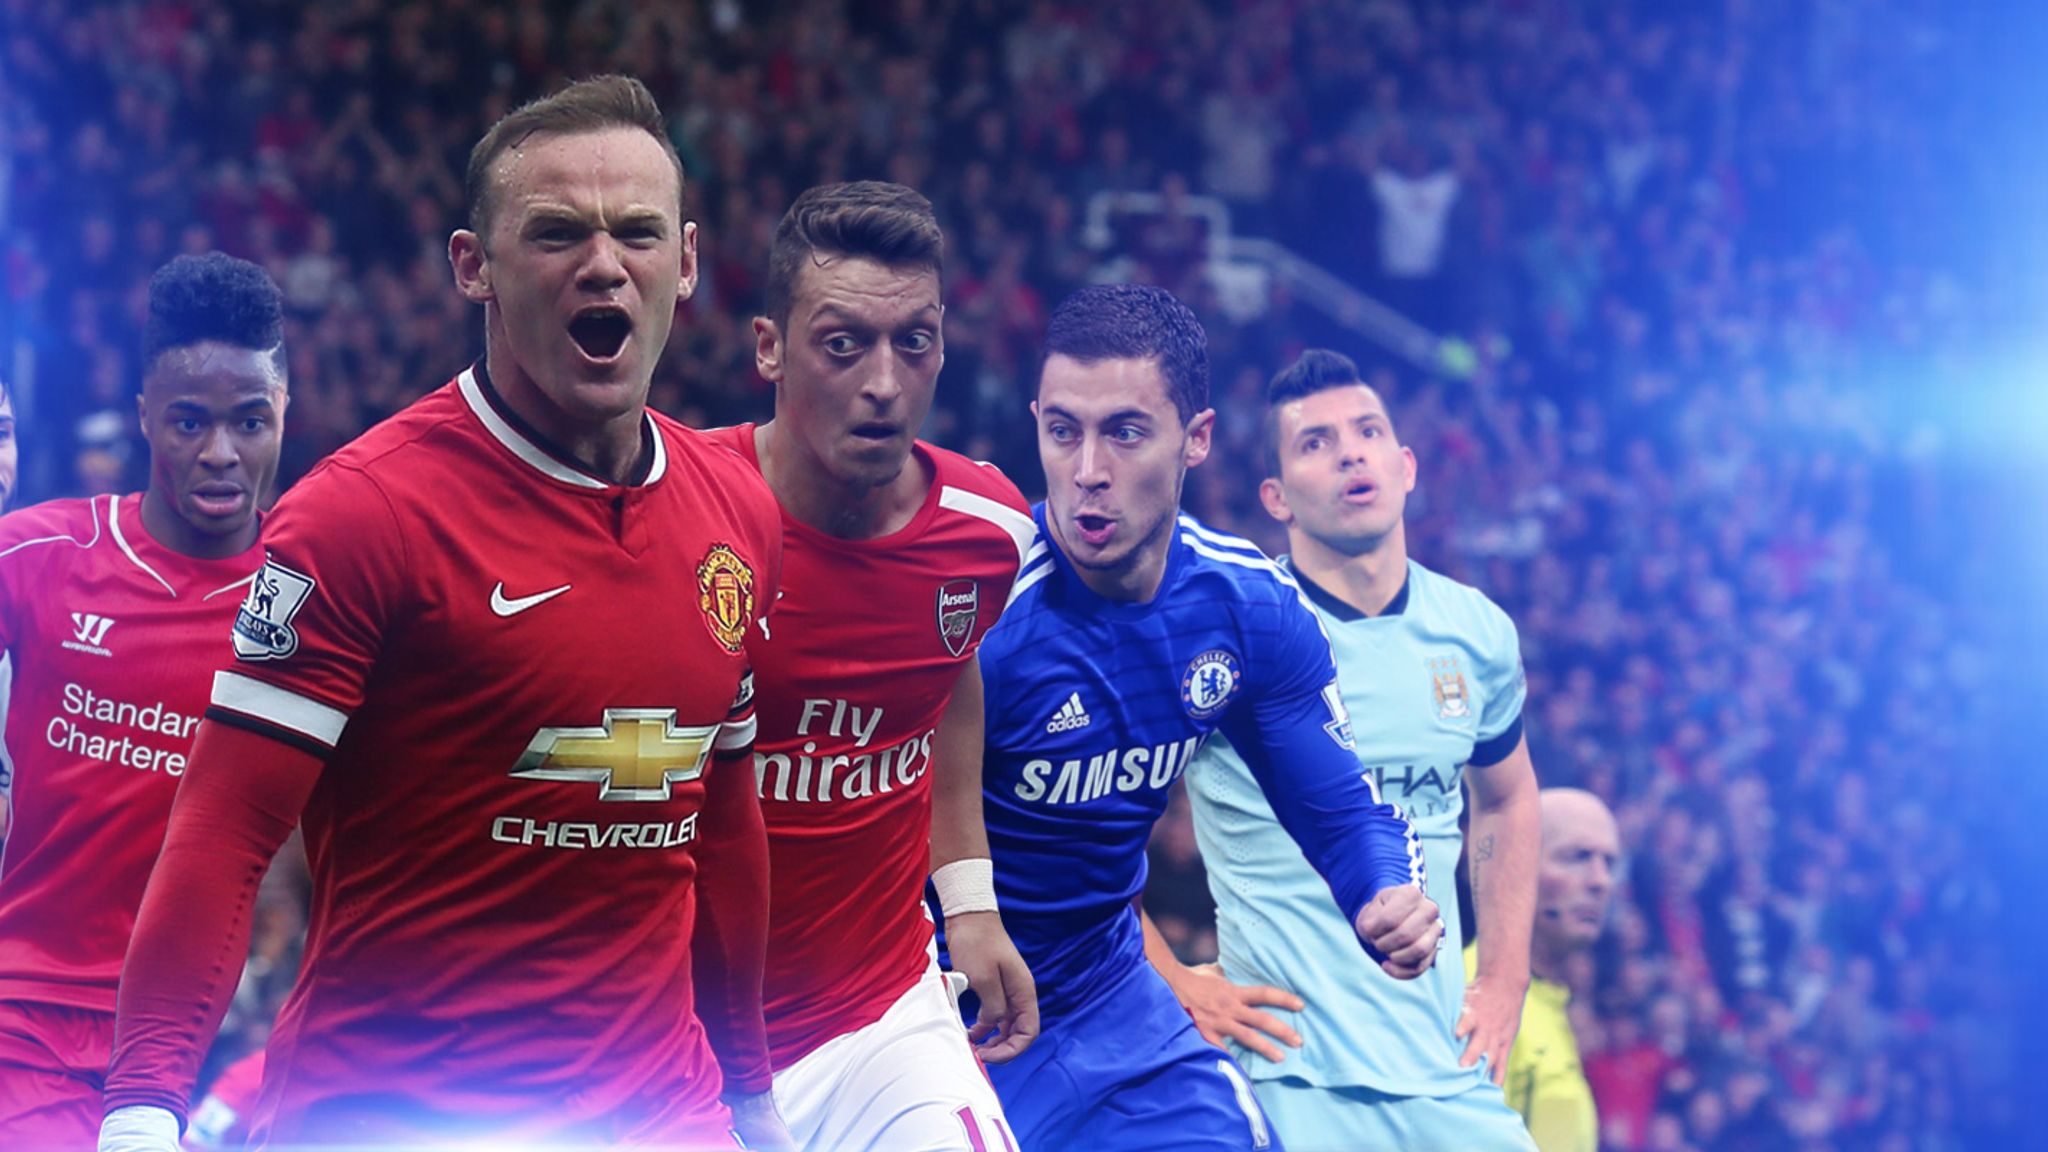 PES 15: Fun footy with Man Utd, but where are Arsenal, Chelsea and City